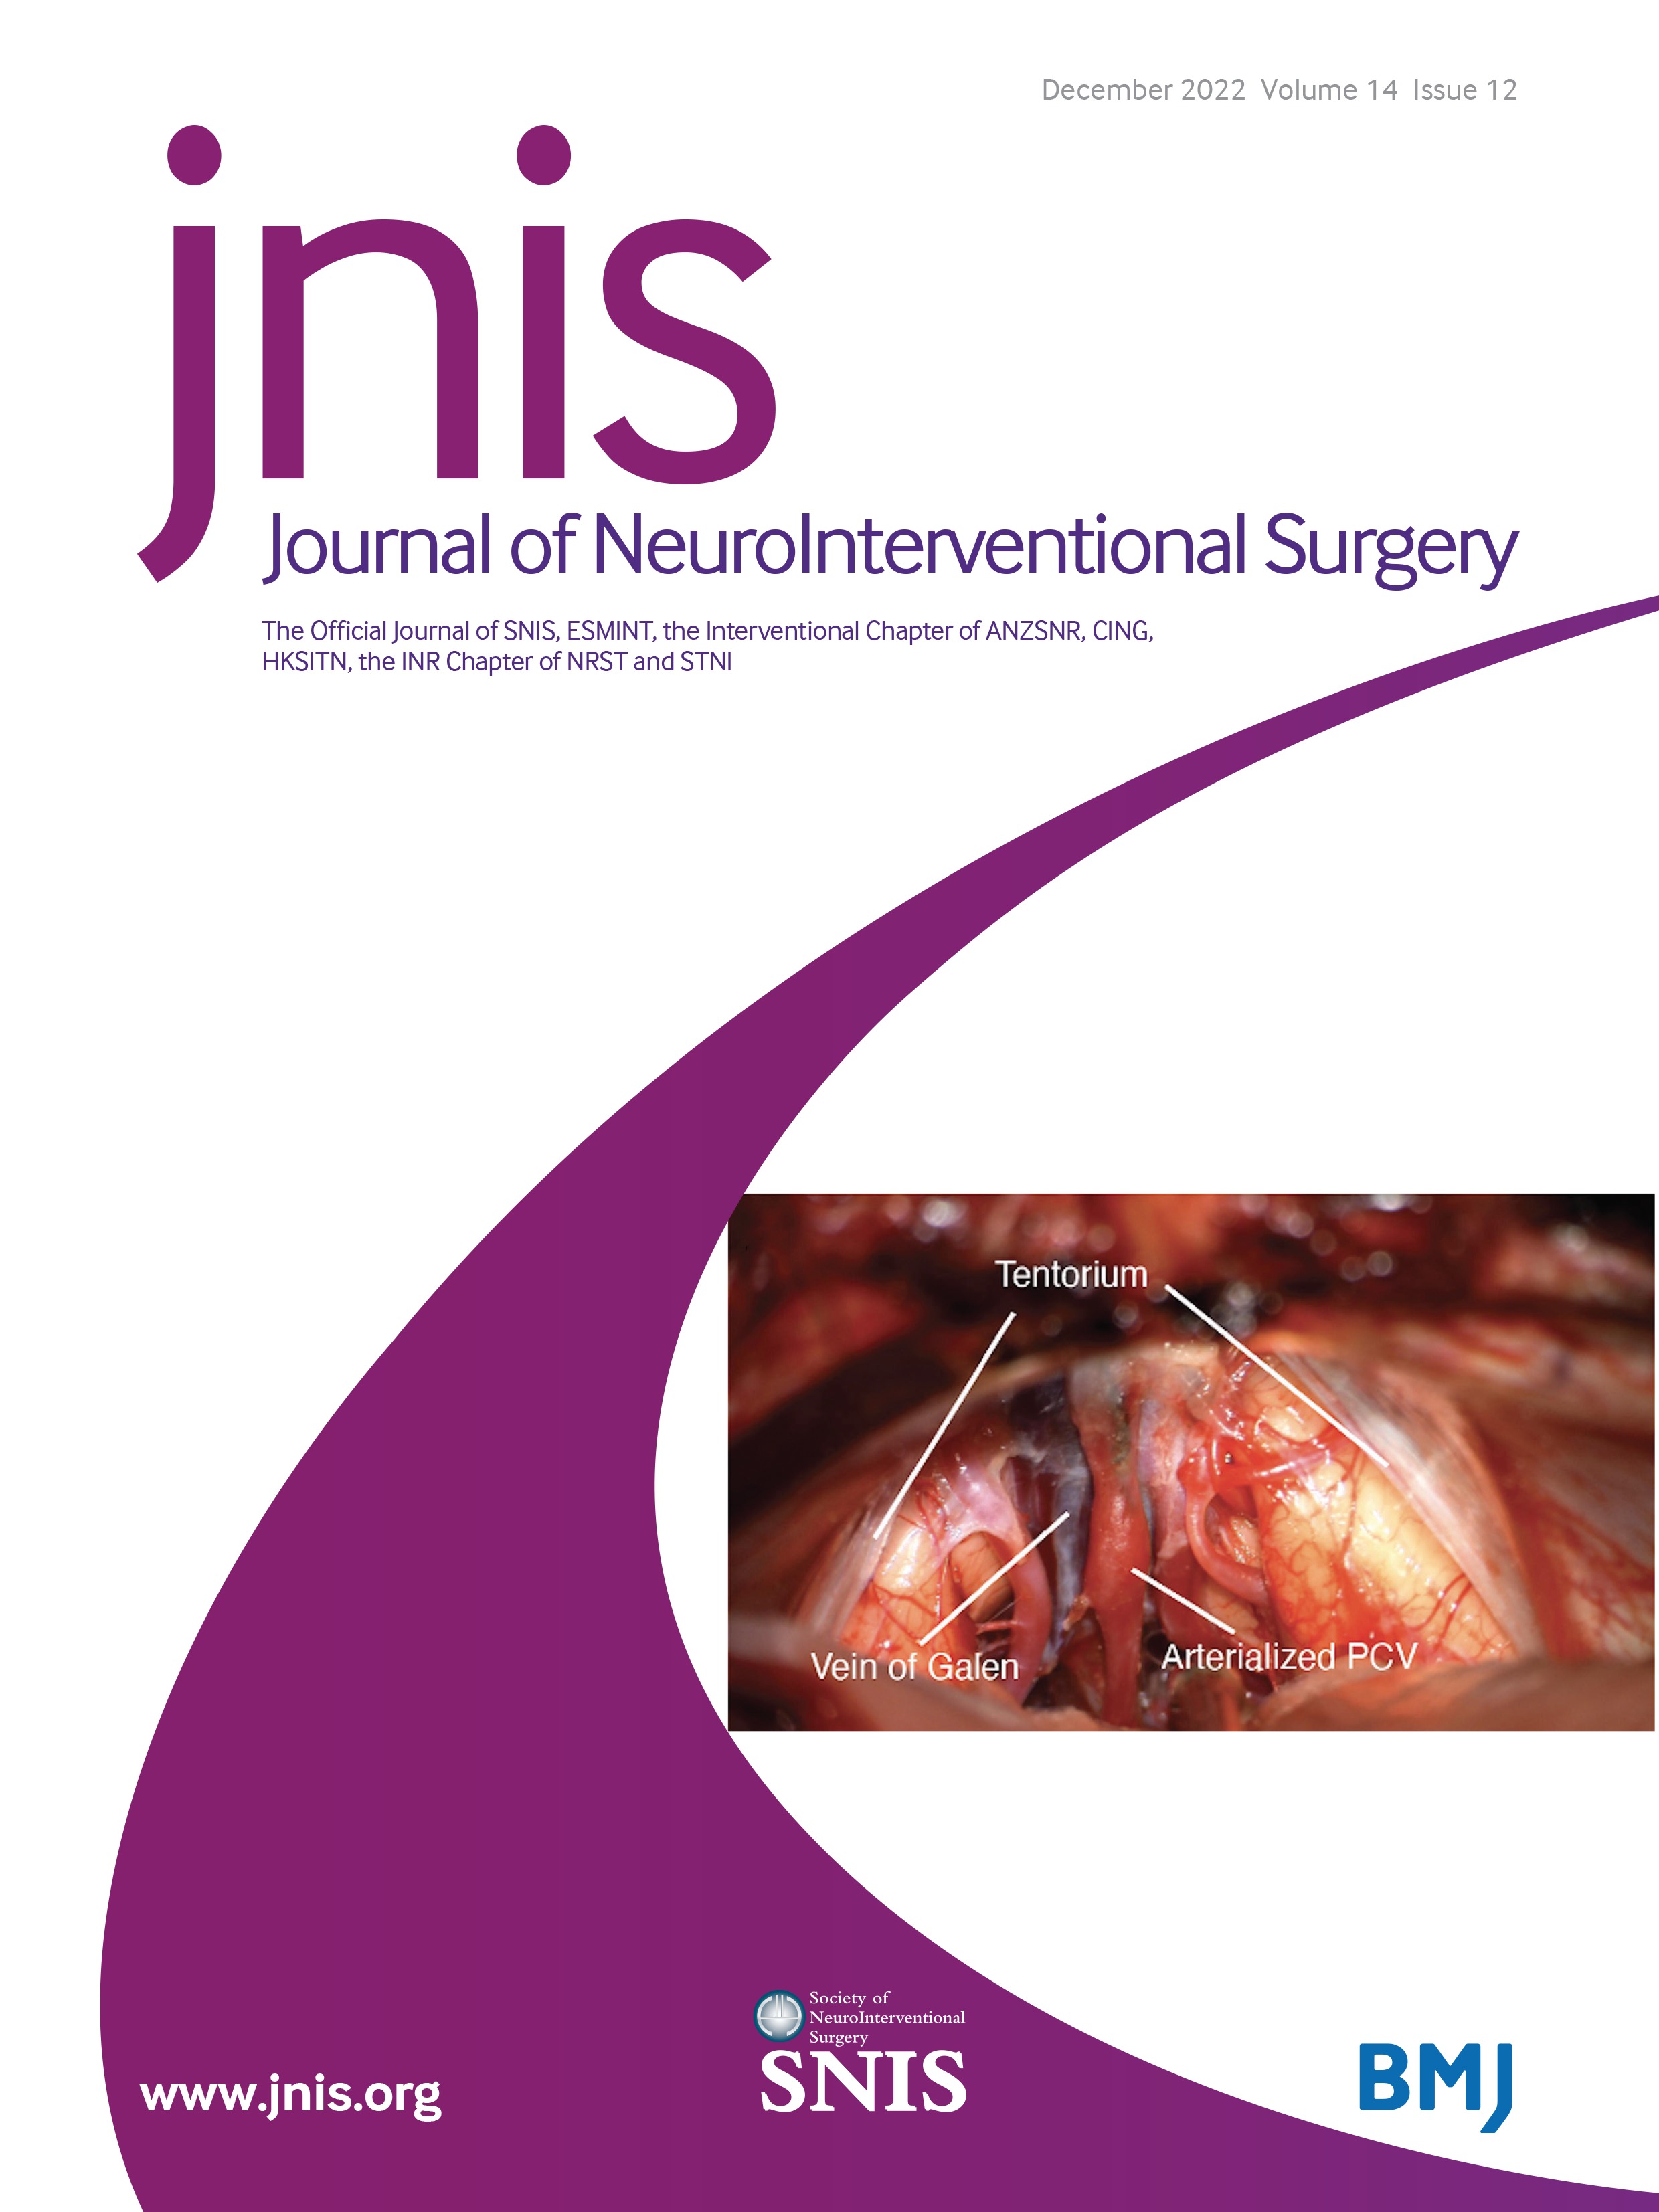 Selective arterial temporary flow arrest with balloons during transvenous embolization for the treatment of brain arteriovenous malformations: a feasibility study with MRI-monitored adverse events